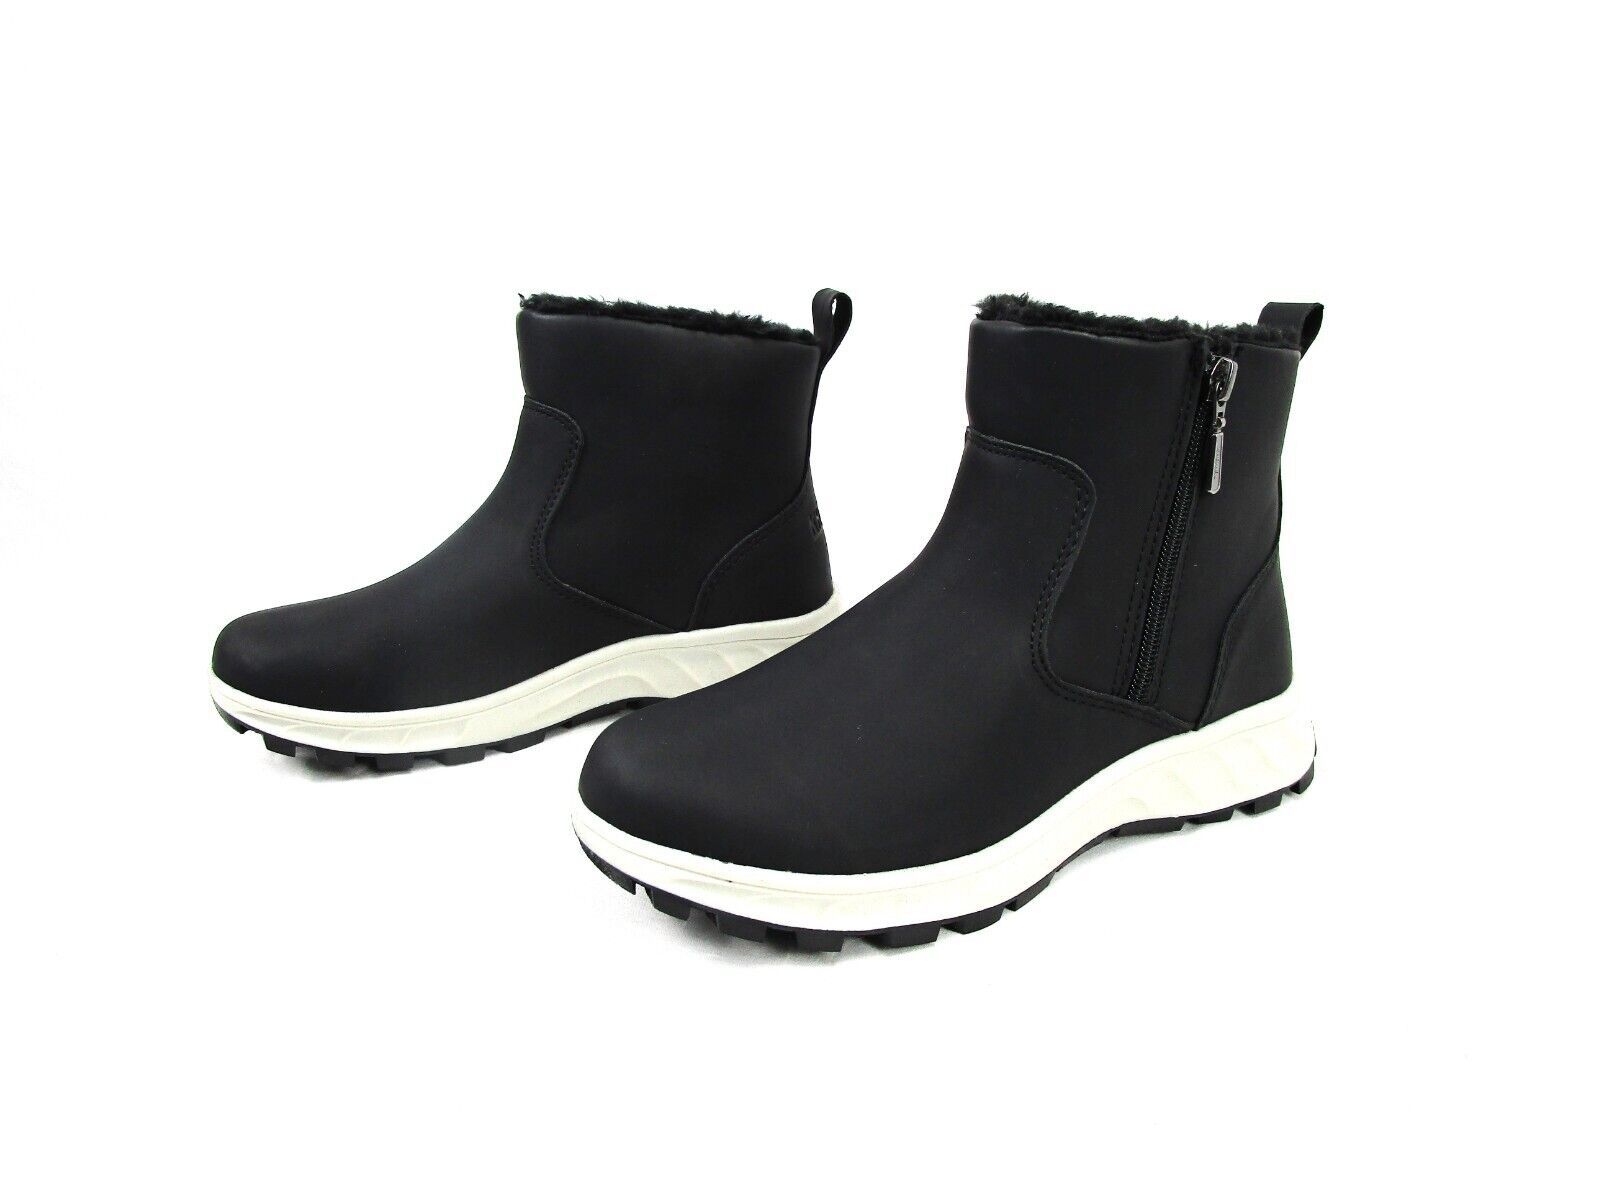 Primary image for Khombu  Sienna Women's All-Weather Boot w Faux Fur, Memory Foam & Repels Water